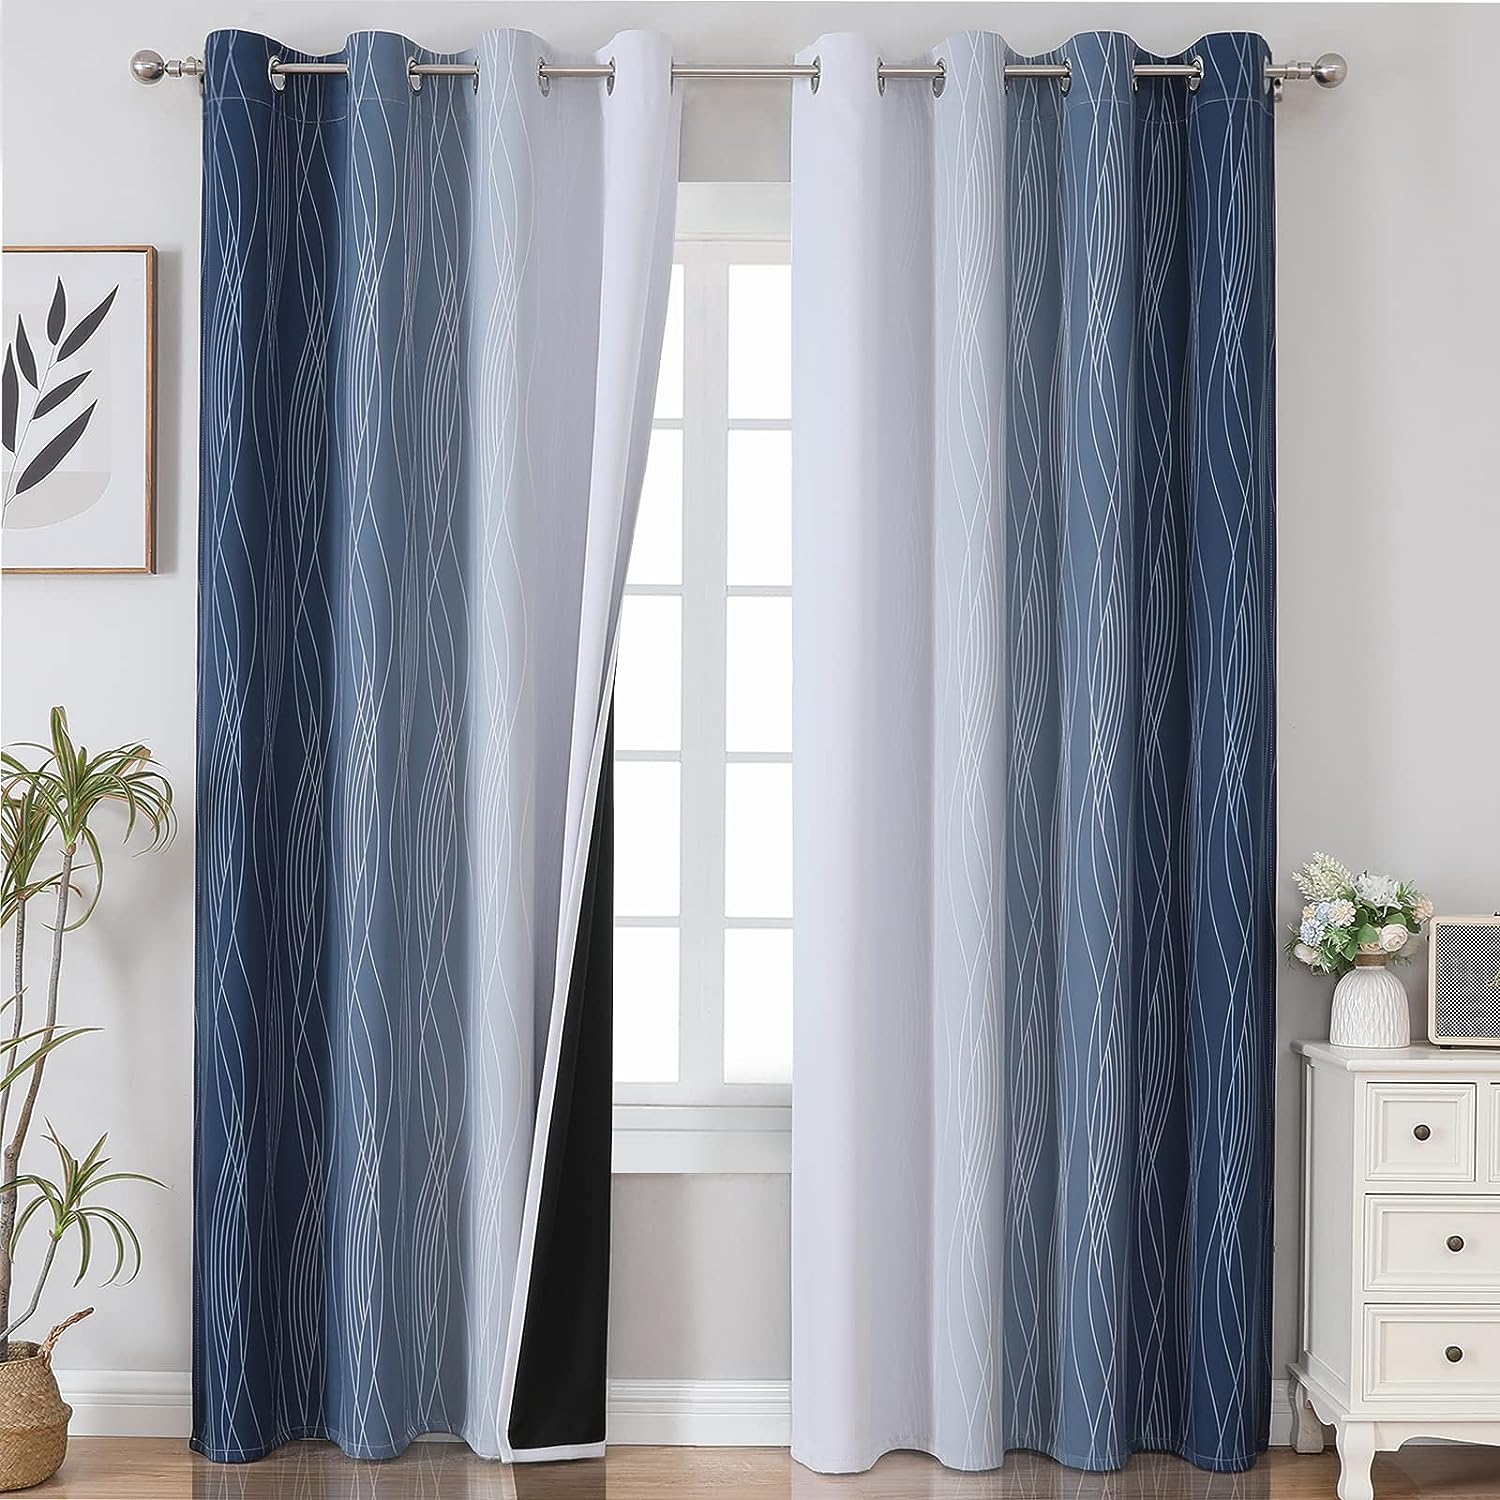 best patterned curtains on amazon